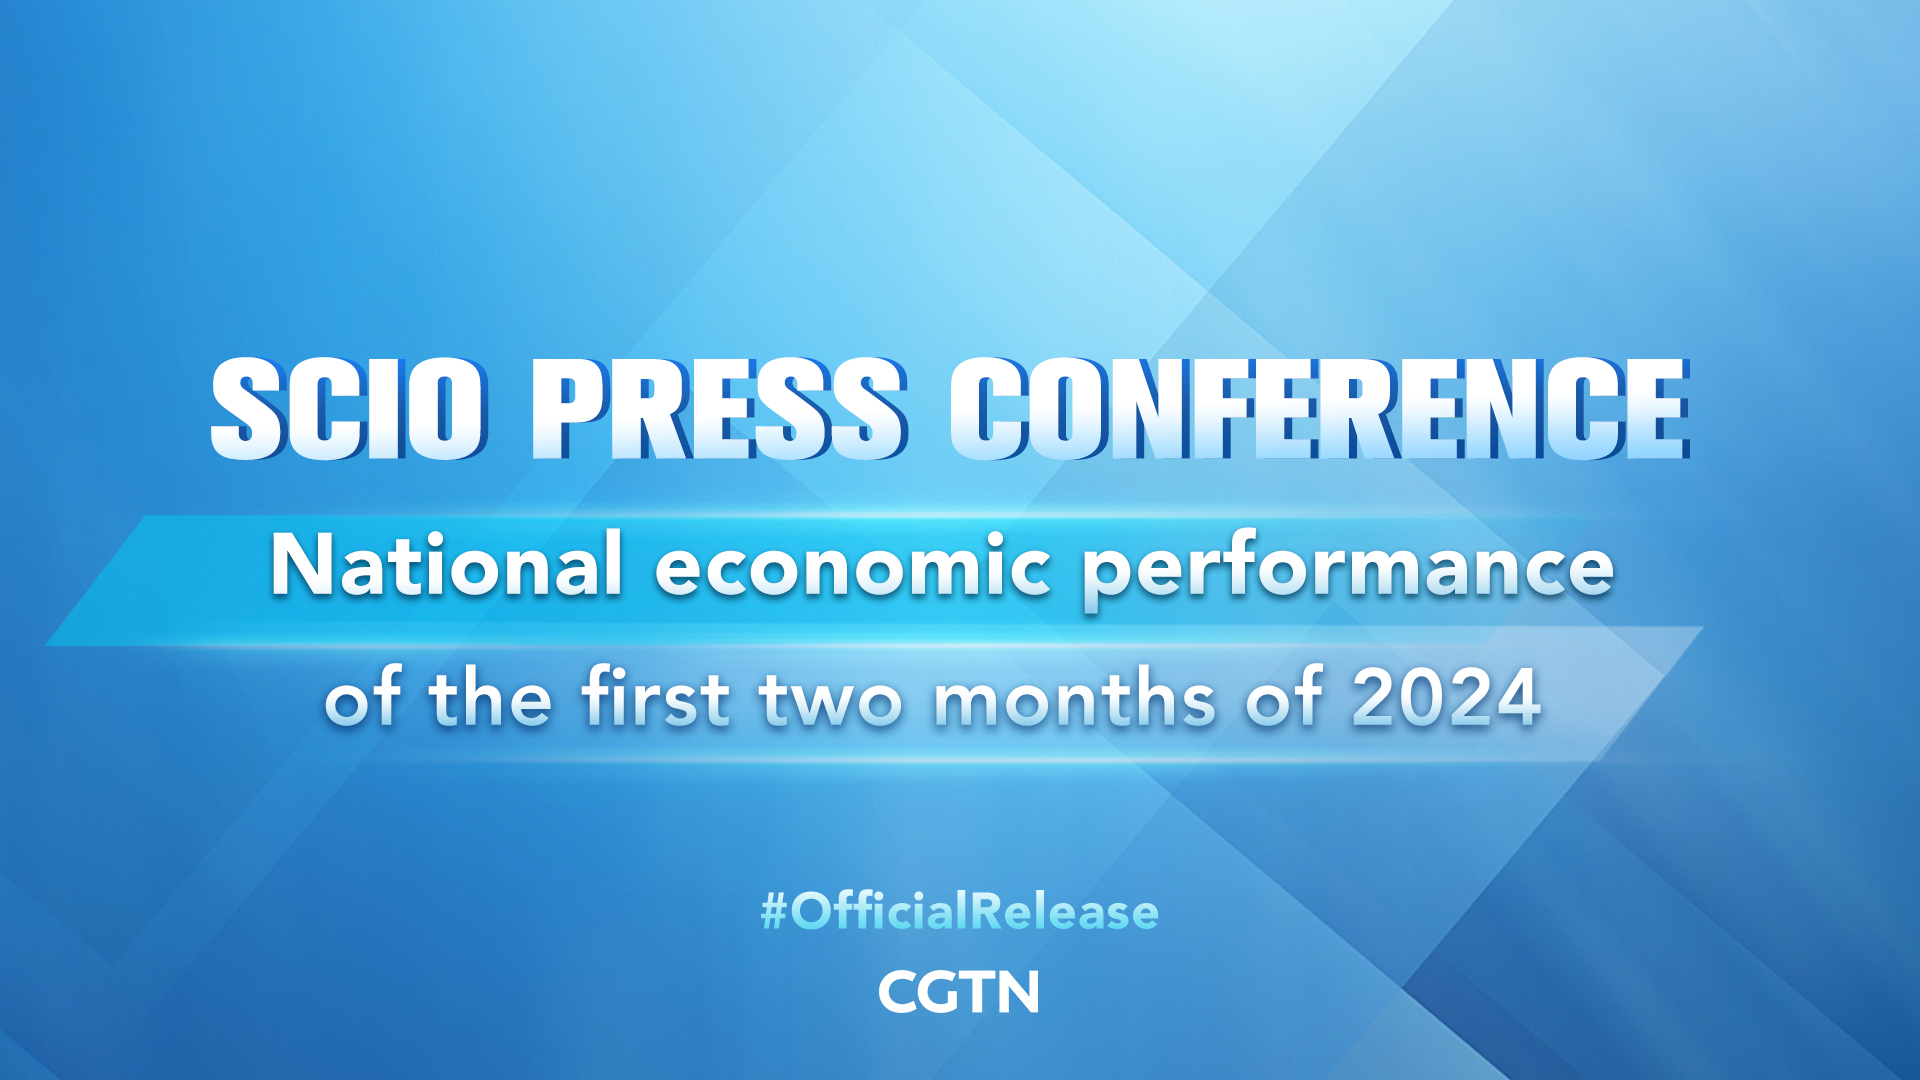 Live: Press conference on national economic performance of the first two months of 2024